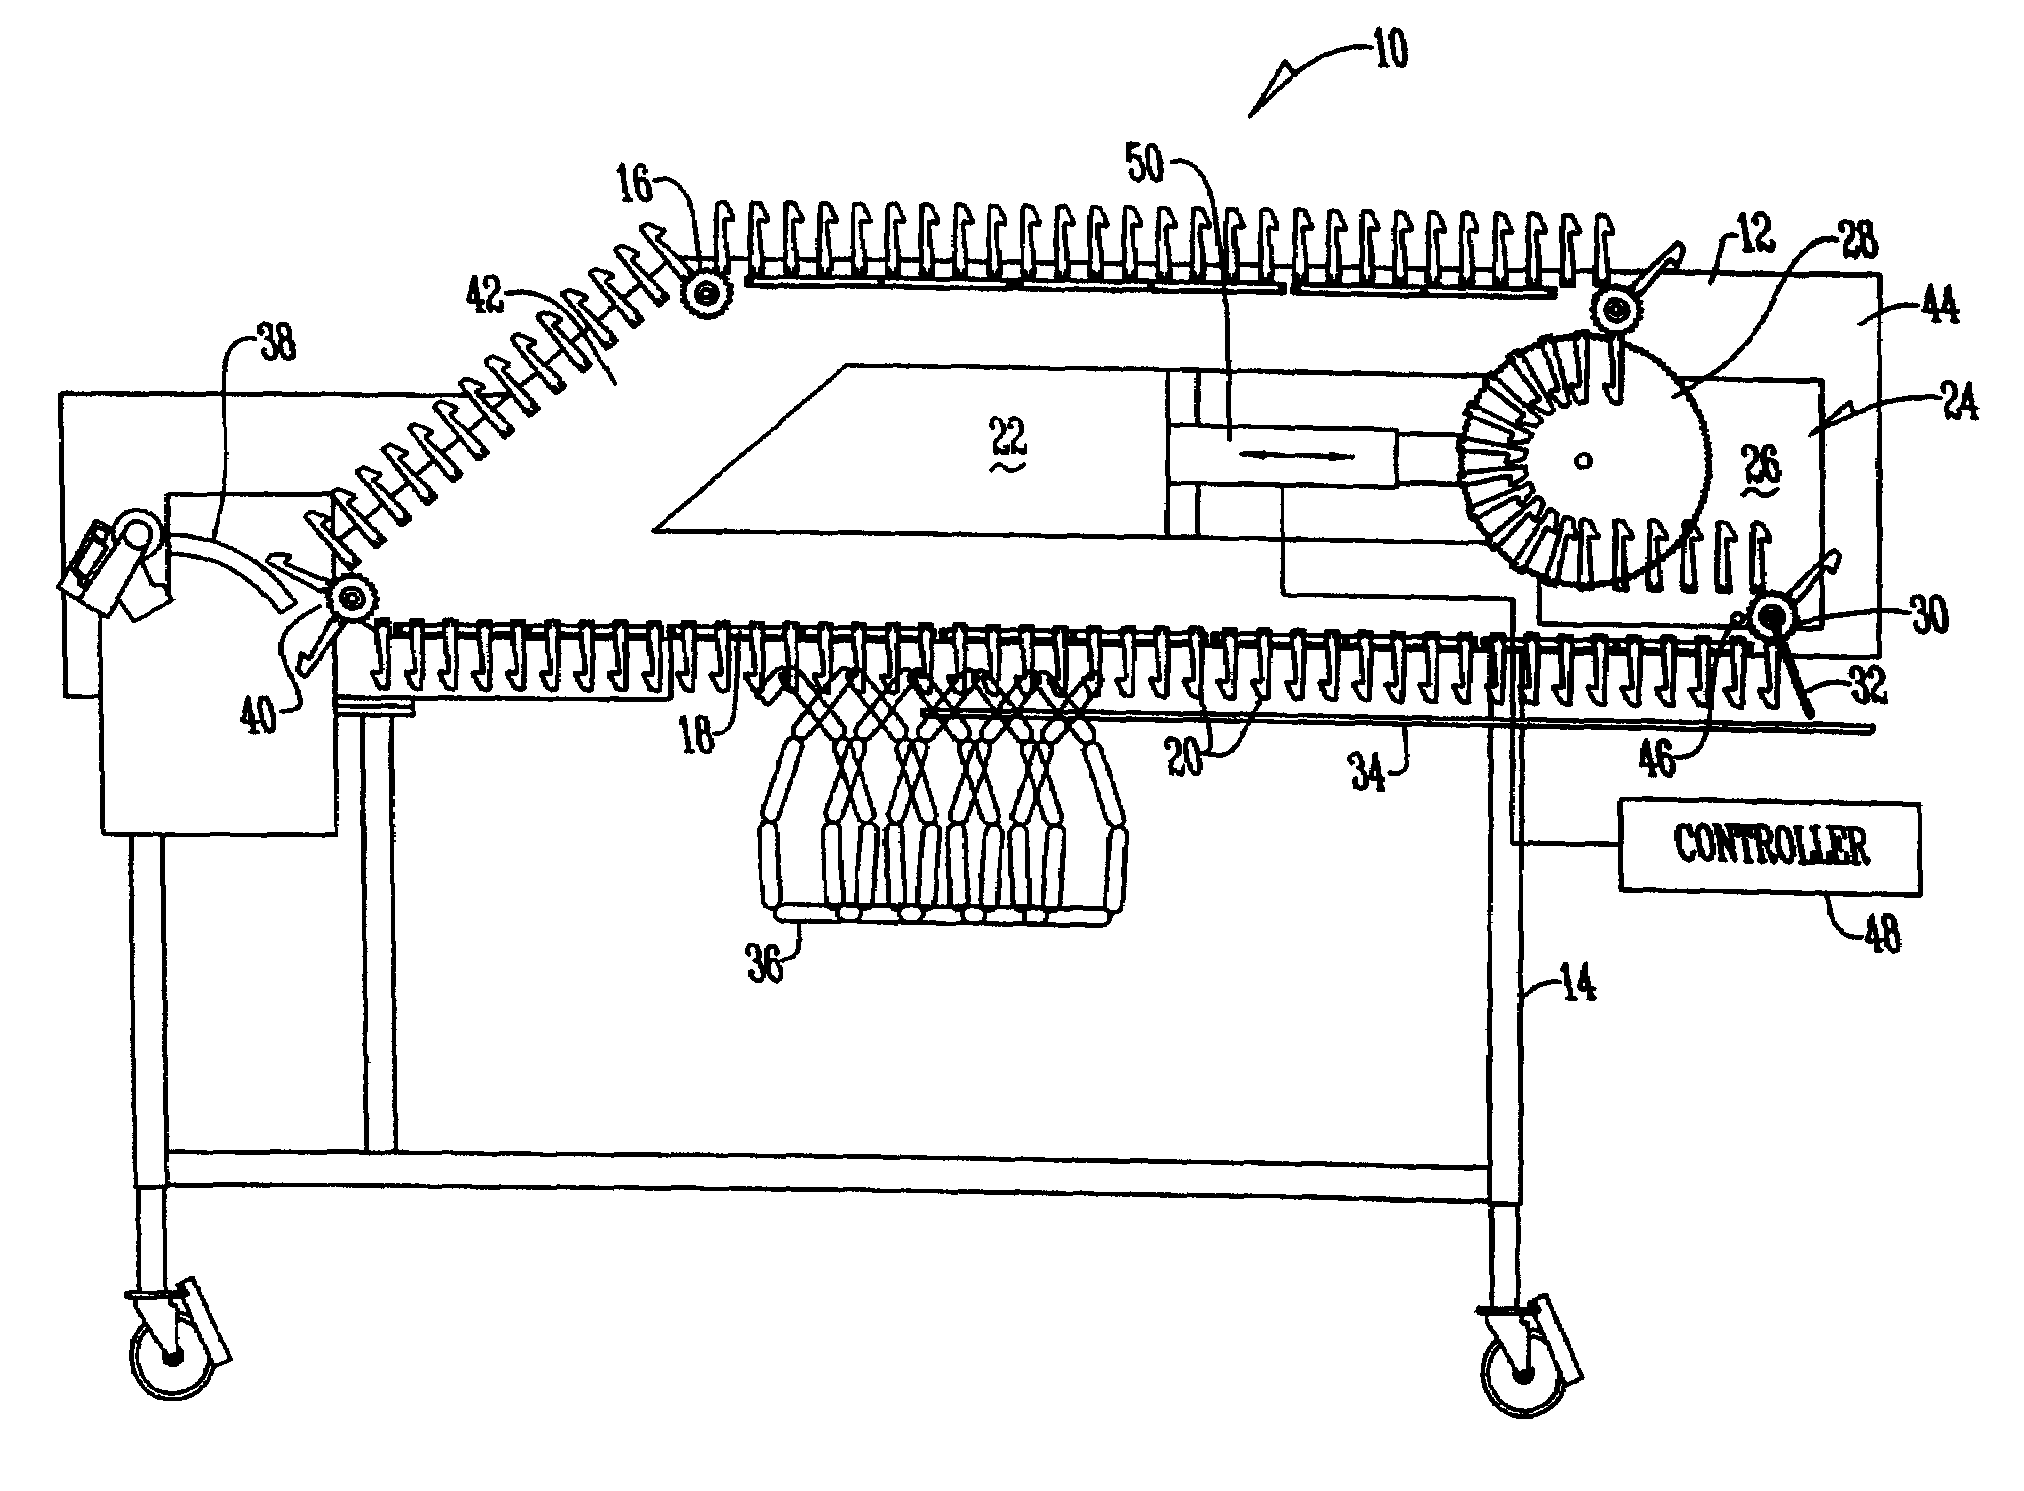 Conveyor system with moveable drop point